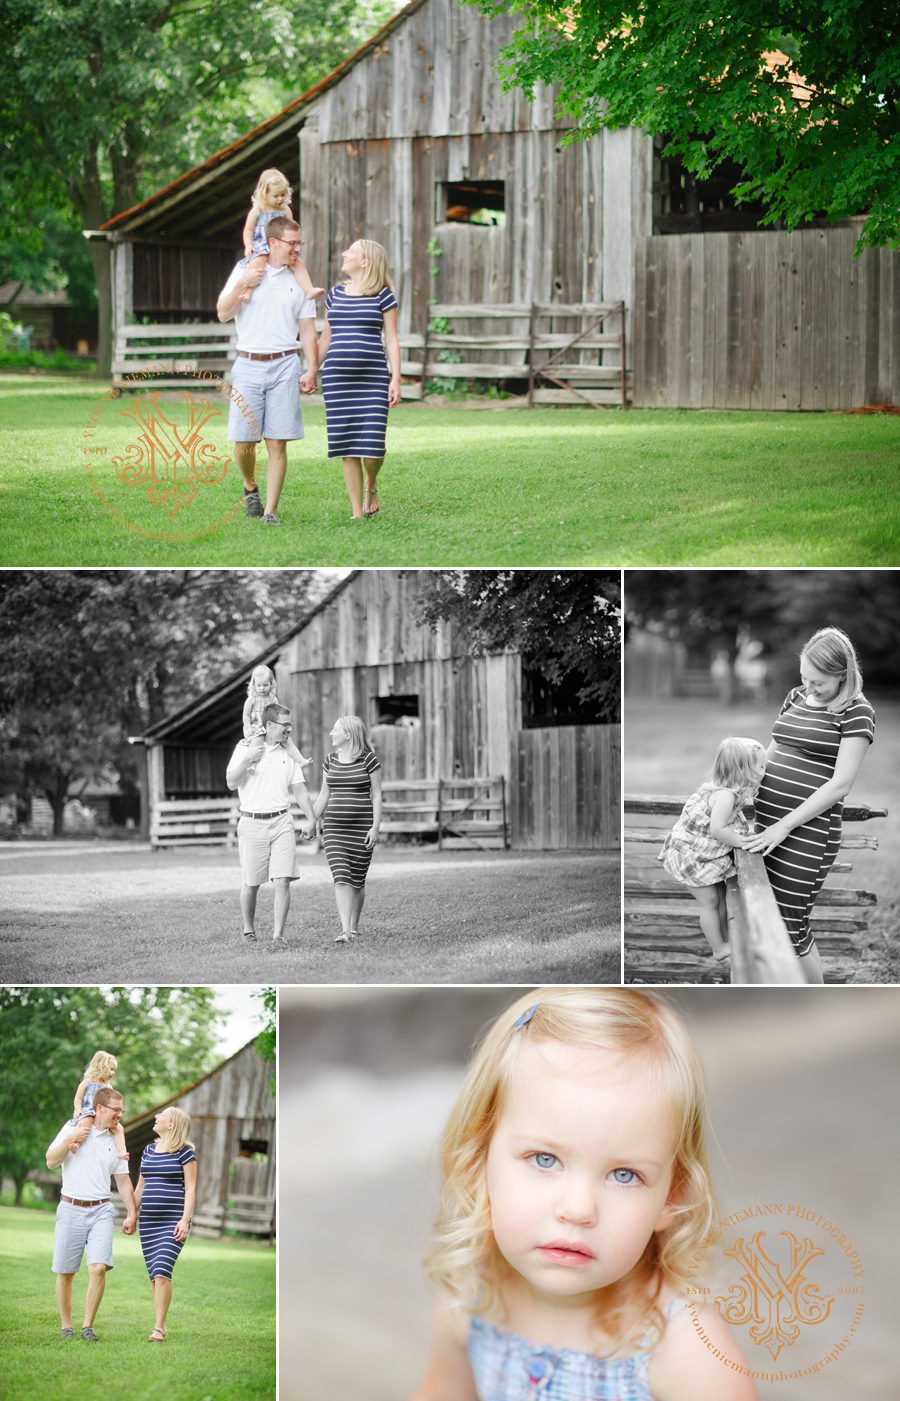 Fun family maternity photography on a farm in the Athens, GA area.